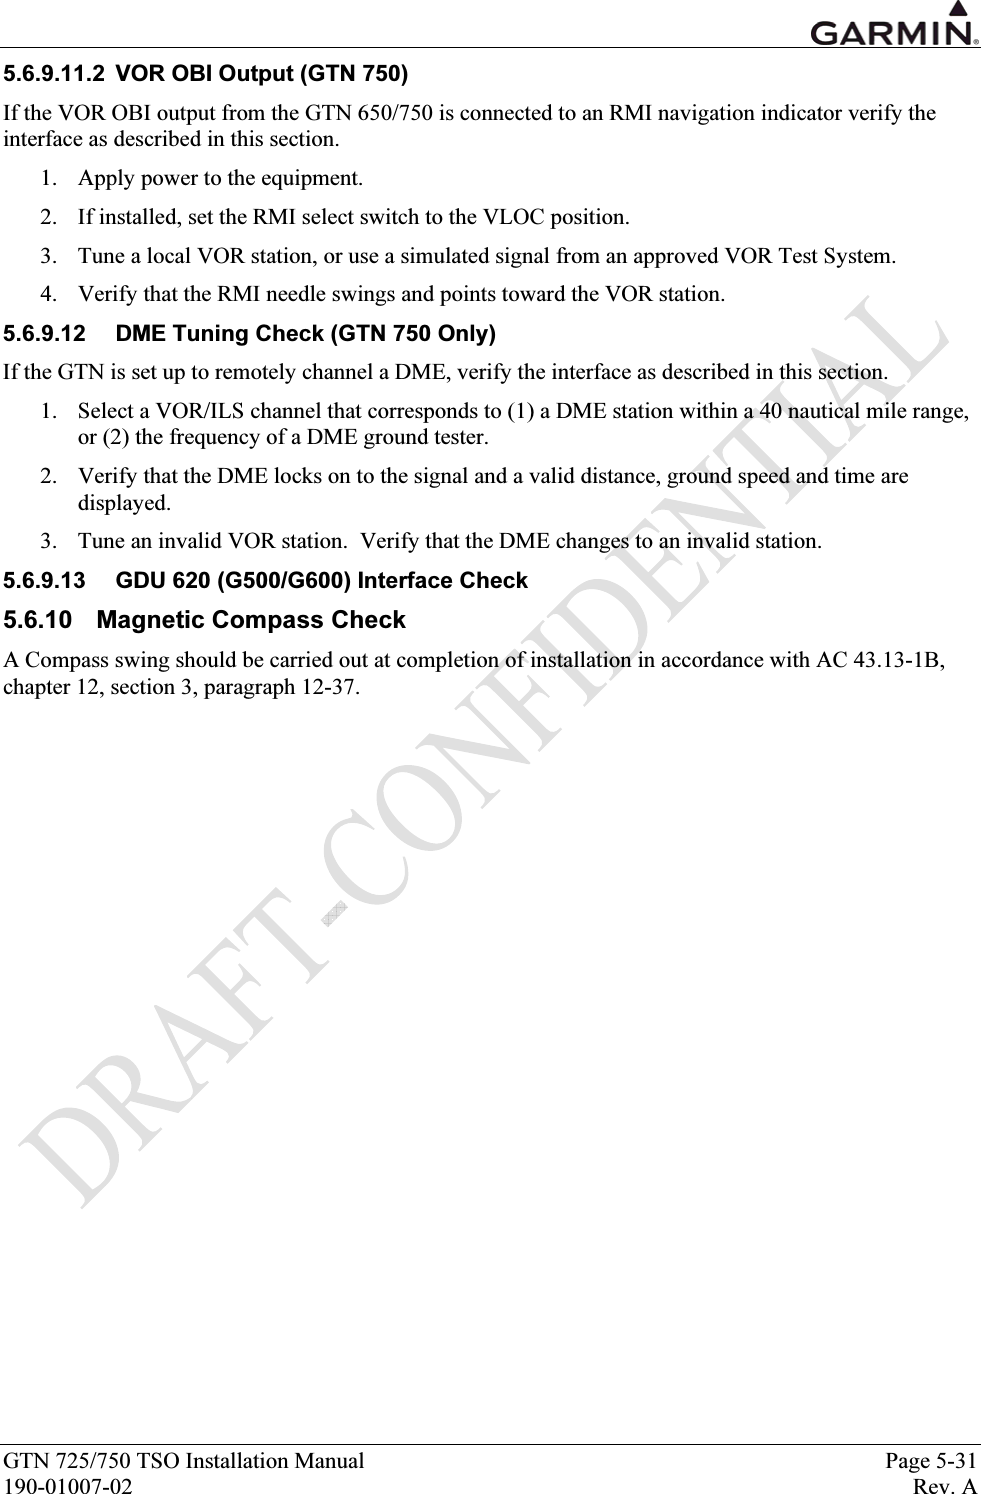  GTN 725/750 TSO Installation Manual  Page 5-31 190-01007-02  Rev. A 5.6.9.11.2  VOR OBI Output (GTN 750) If the VOR OBI output from the GTN 650/750 is connected to an RMI navigation indicator verify the interface as described in this section. 1. Apply power to the equipment. 2. If installed, set the RMI select switch to the VLOC position.   3. Tune a local VOR station, or use a simulated signal from an approved VOR Test System. 4. Verify that the RMI needle swings and points toward the VOR station. 5.6.9.12  DME Tuning Check (GTN 750 Only) If the GTN is set up to remotely channel a DME, verify the interface as described in this section. 1. Select a VOR/ILS channel that corresponds to (1) a DME station within a 40 nautical mile range, or (2) the frequency of a DME ground tester.   2. Verify that the DME locks on to the signal and a valid distance, ground speed and time are displayed. 3. Tune an invalid VOR station.  Verify that the DME changes to an invalid station. 5.6.9.13  GDU 620 (G500/G600) Interface Check 5.6.10 Magnetic Compass Check A Compass swing should be carried out at completion of installation in accordance with AC 43.13-1B, chapter 12, section 3, paragraph 12-37. 